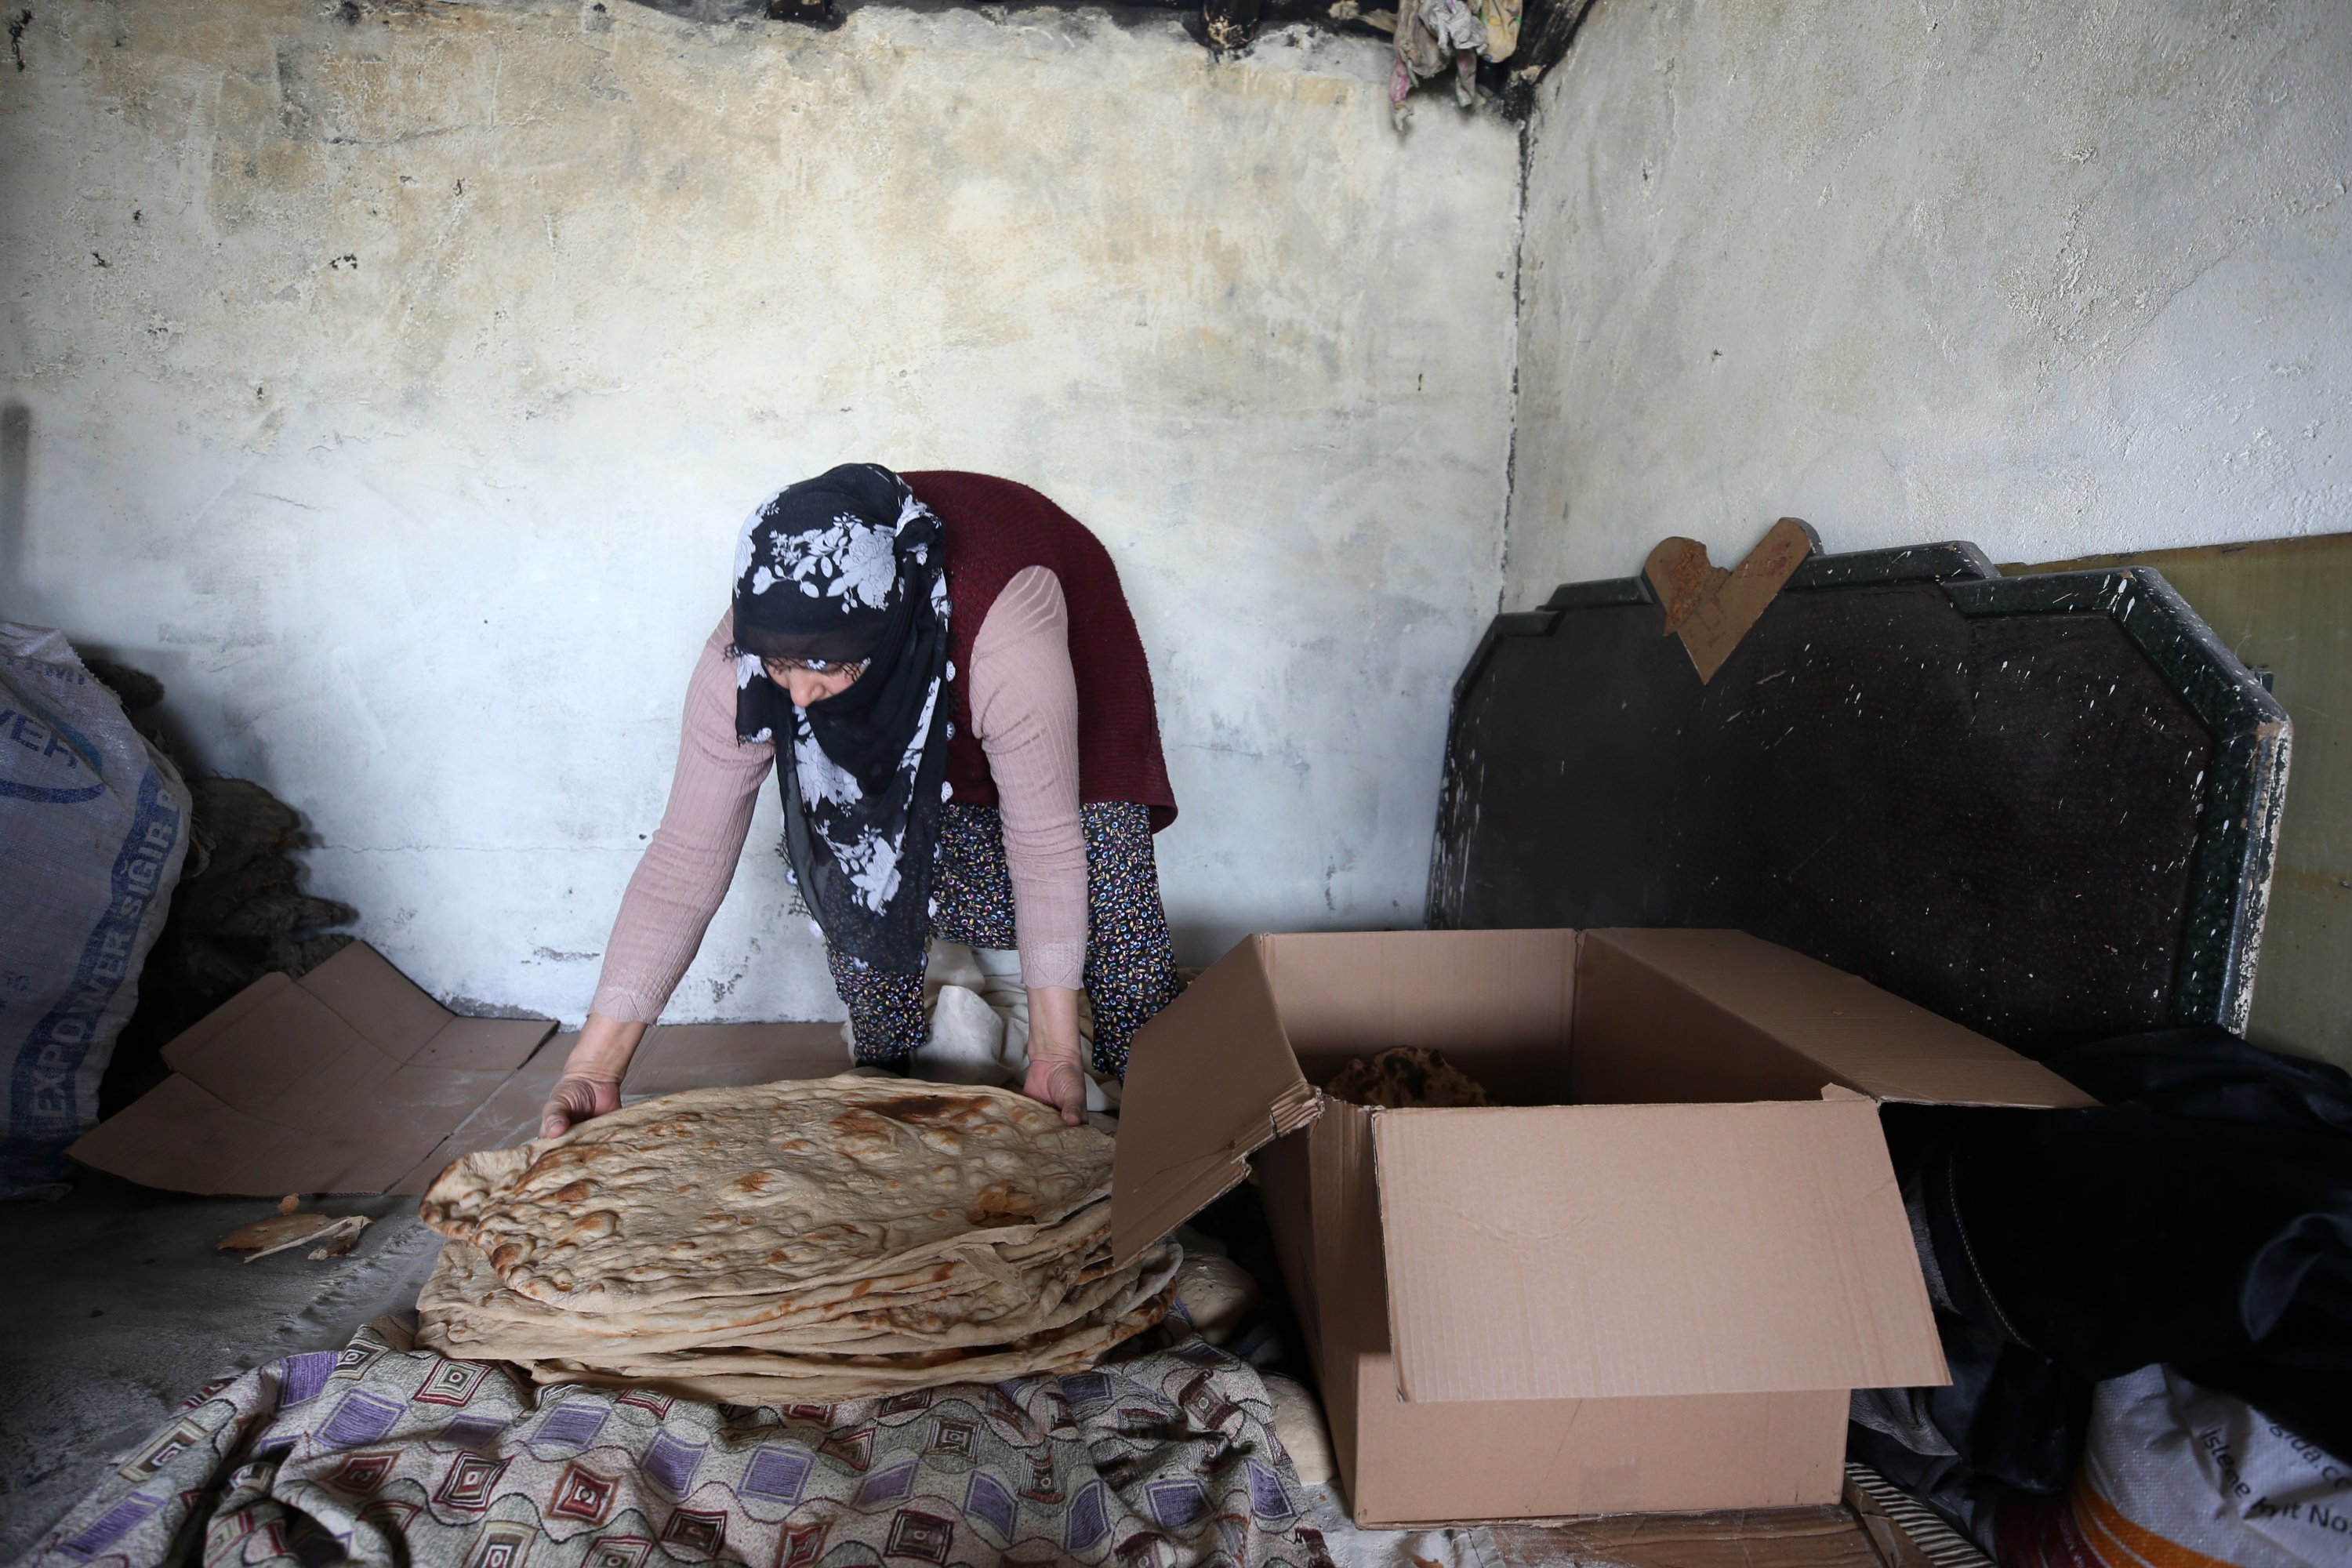 Women living in the villages of Muş baked village bread for earthquake victims, contributing to the relief efforts to assist in line with their bounds of possibility, Muş, Türkiye, Feb. 9. 2023. (AA Photo)